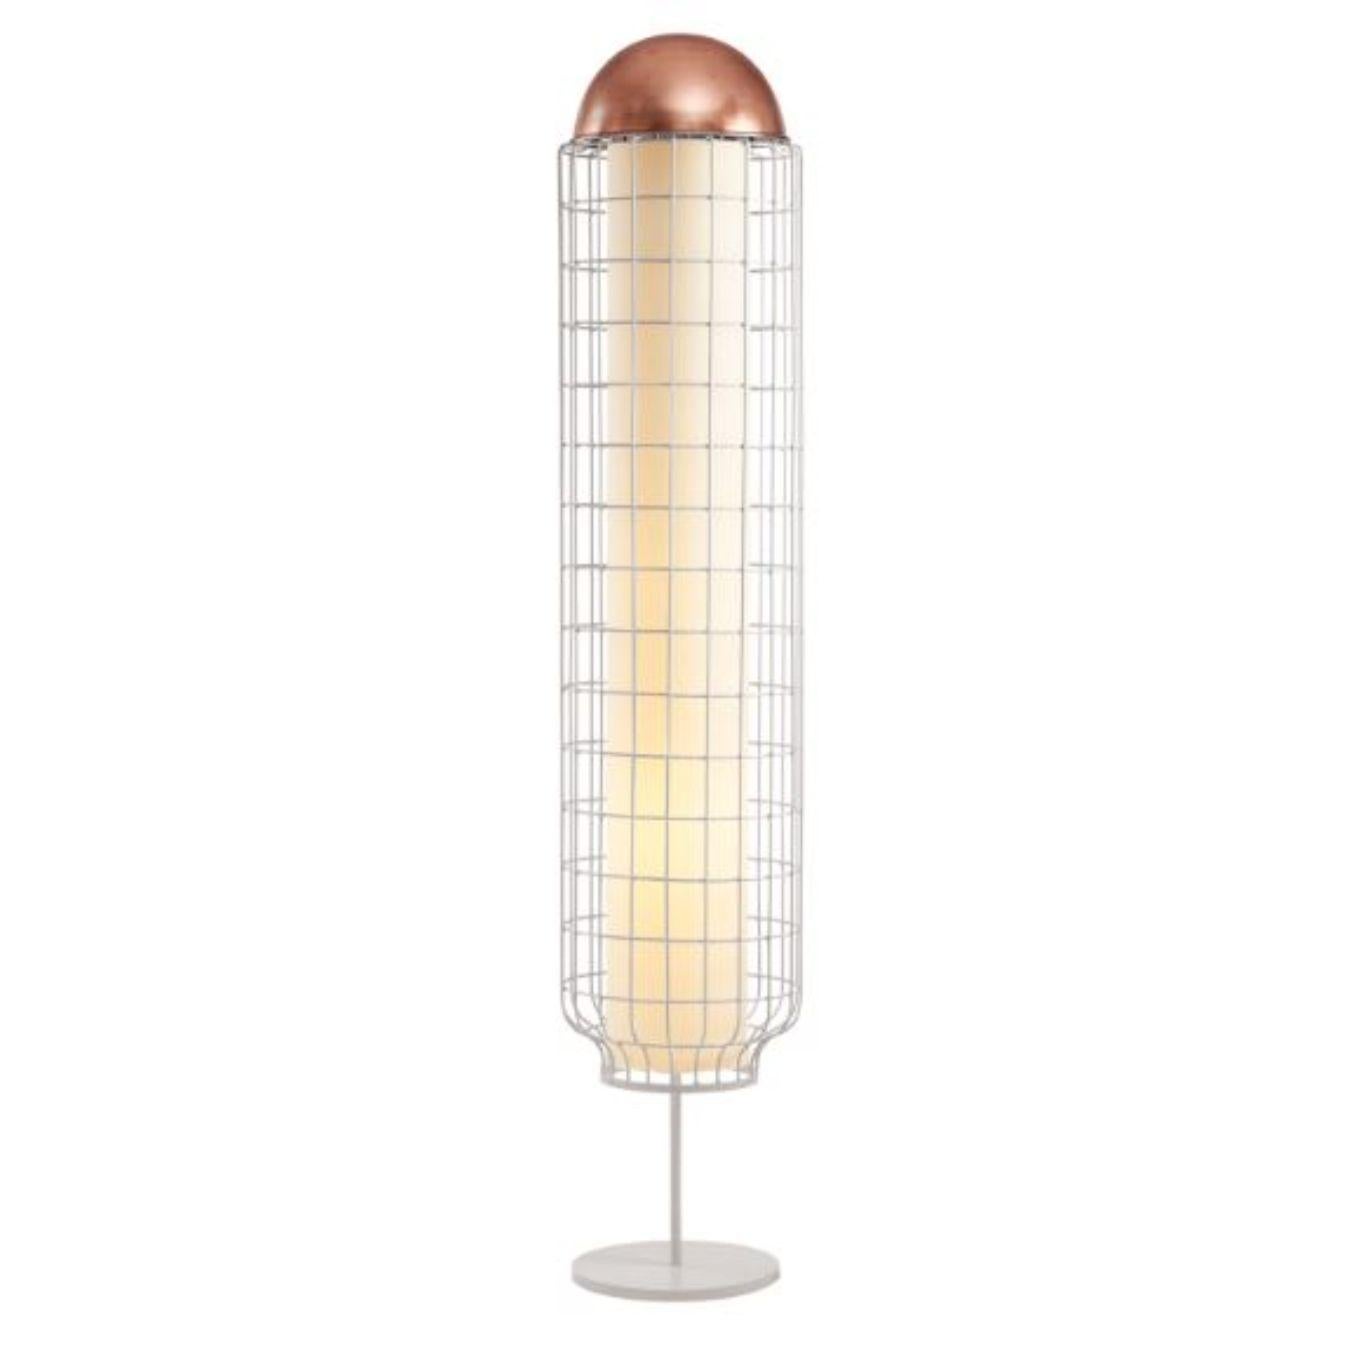 Copper and Taupe Magnolia floor lamp by Dooq
Dimensions: W 37 x D 37 x H 170 cm
Materials: lacquered metal, polished or brushed metal, copper.
abat-jour: cotton
Also available in different colours and materials.

Information:
230V/50Hz
E27/2x20W